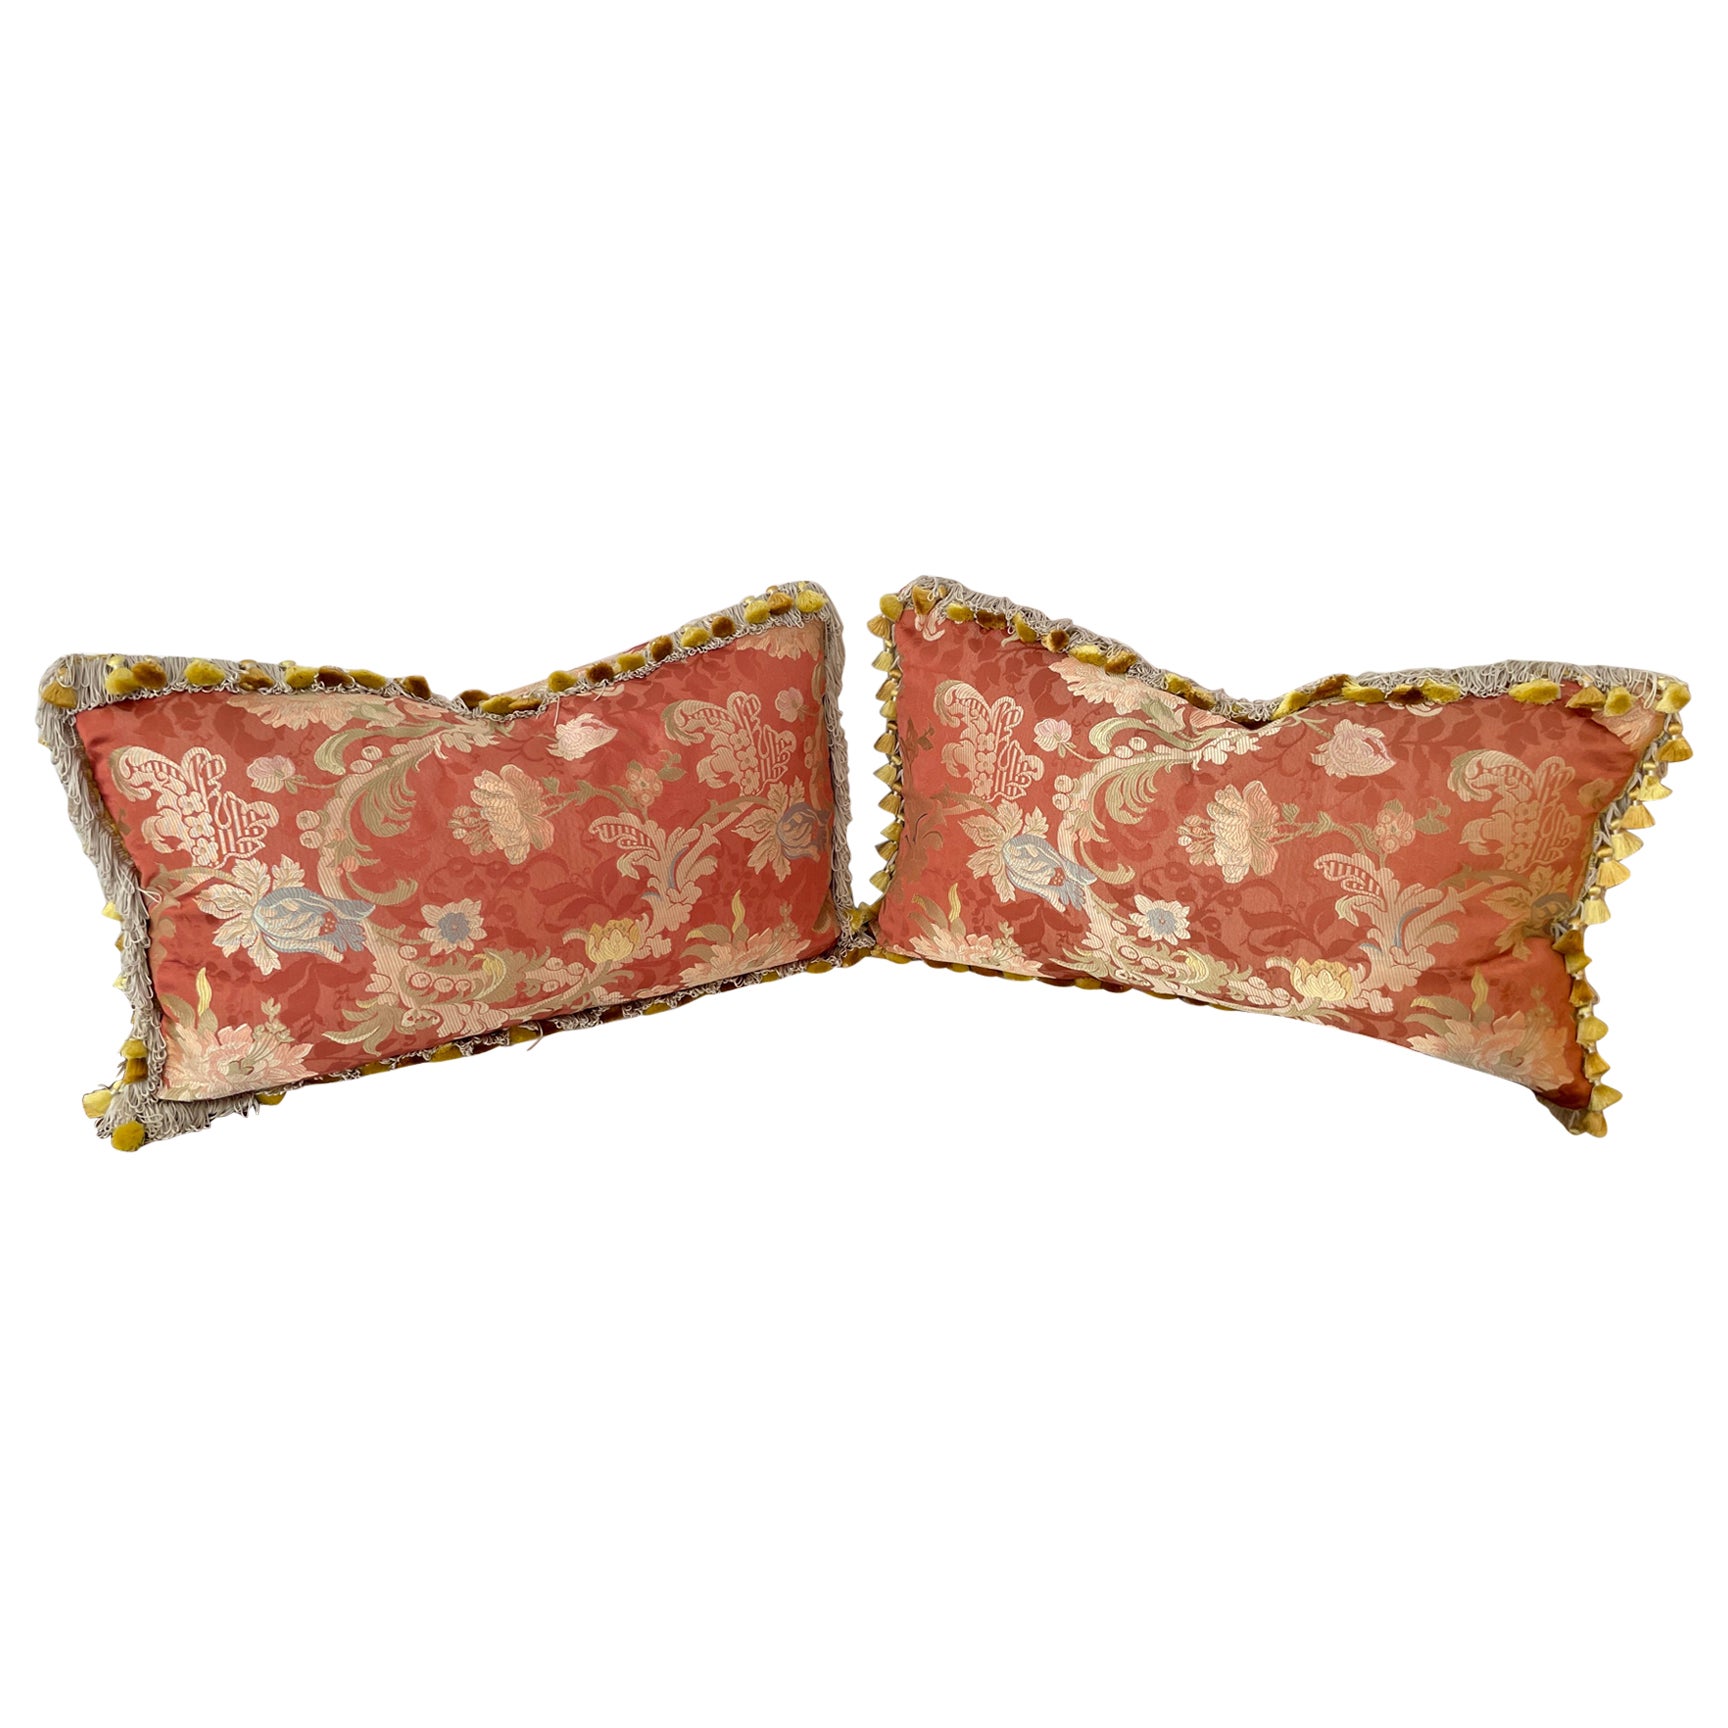 French Decorative Rectangular Pillows, a Pair For Sale